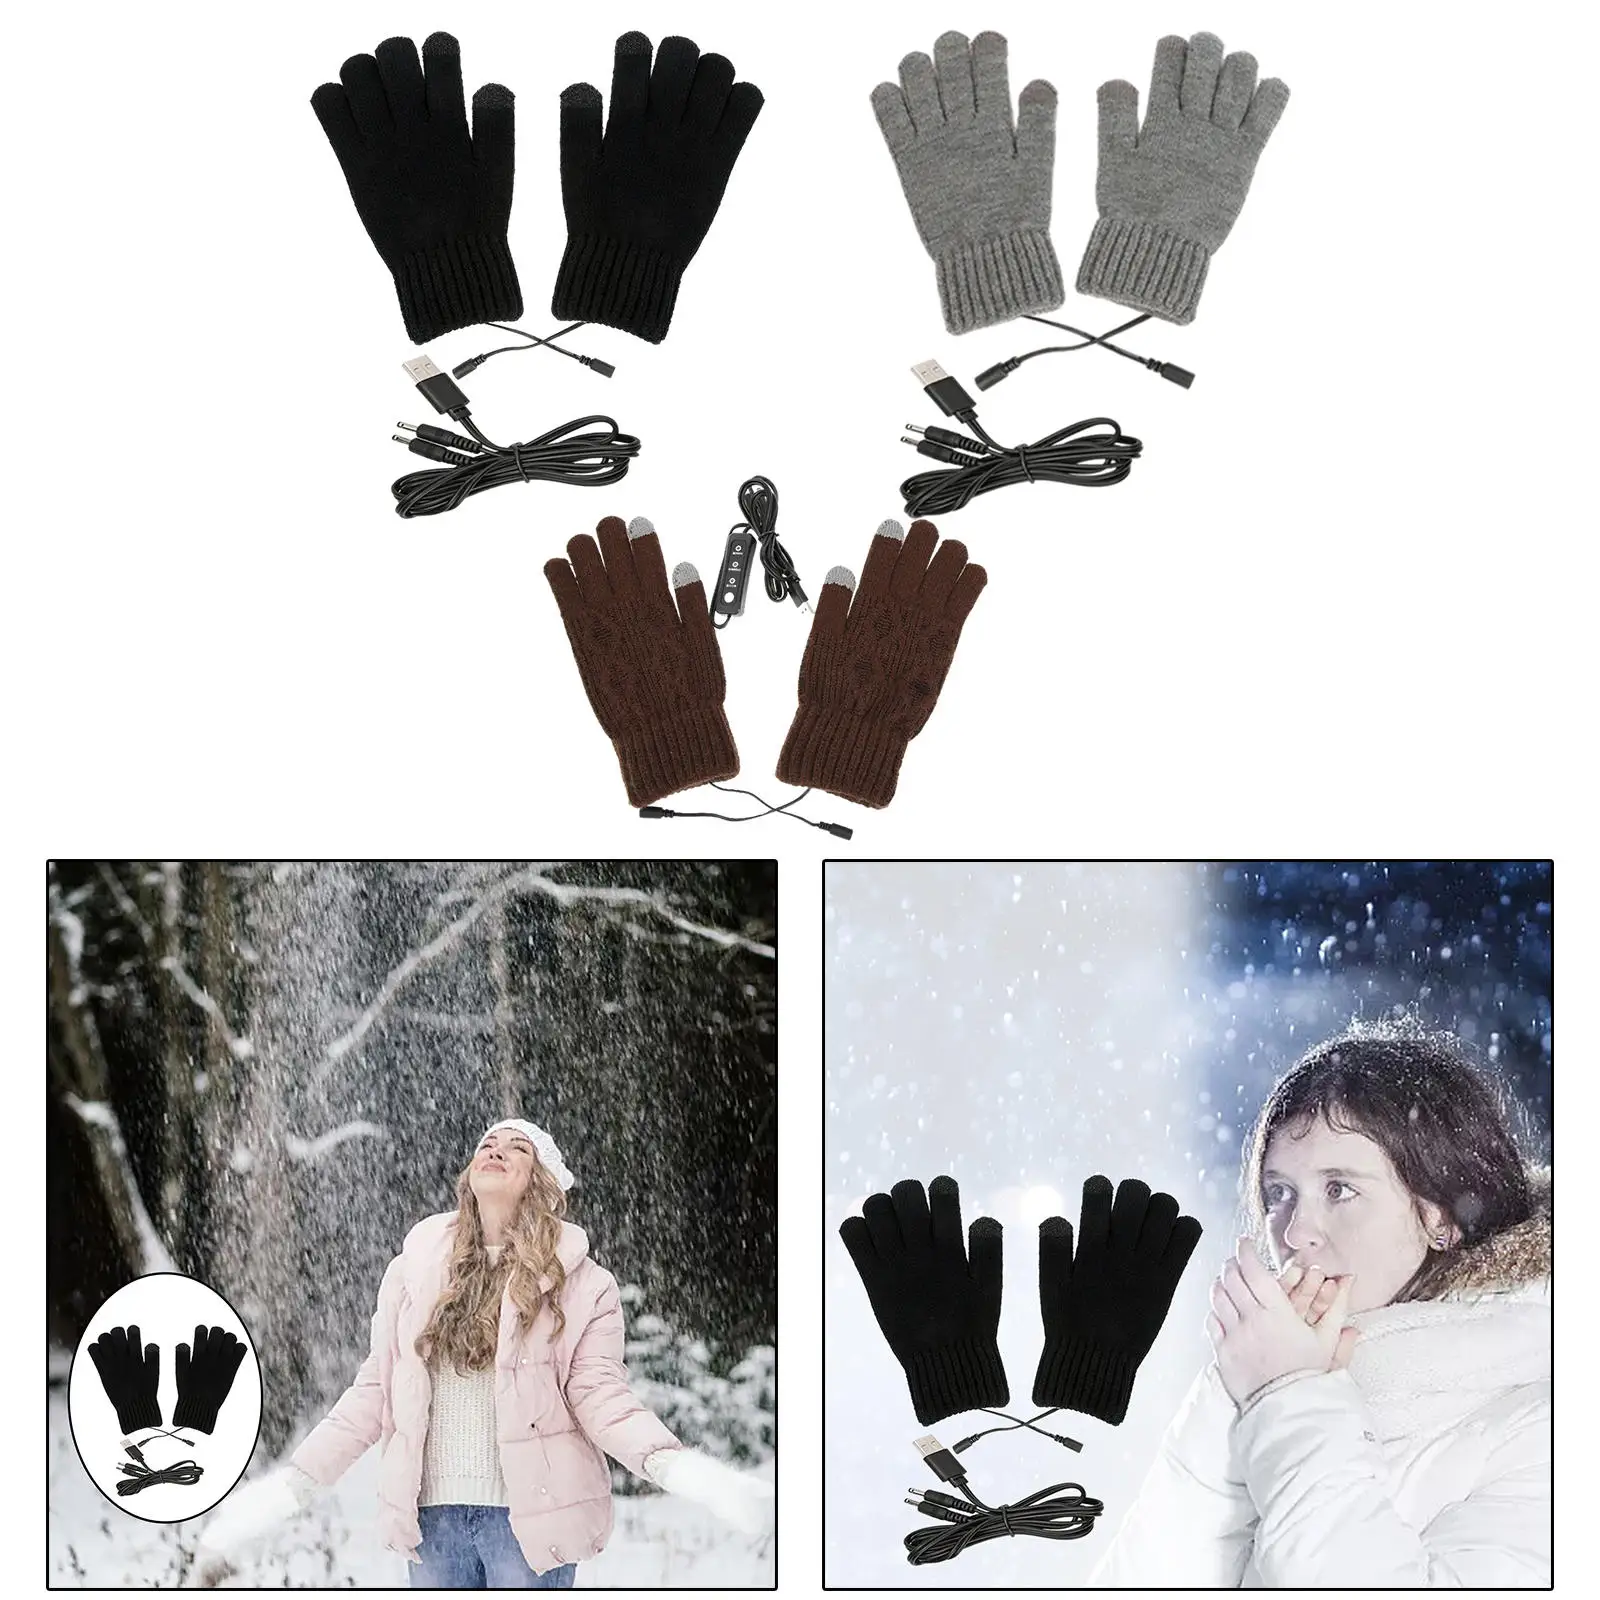 Winter Electric Heating Gloves Thermal USB Heated Gloves Electric Heating Glove Heated Gloves